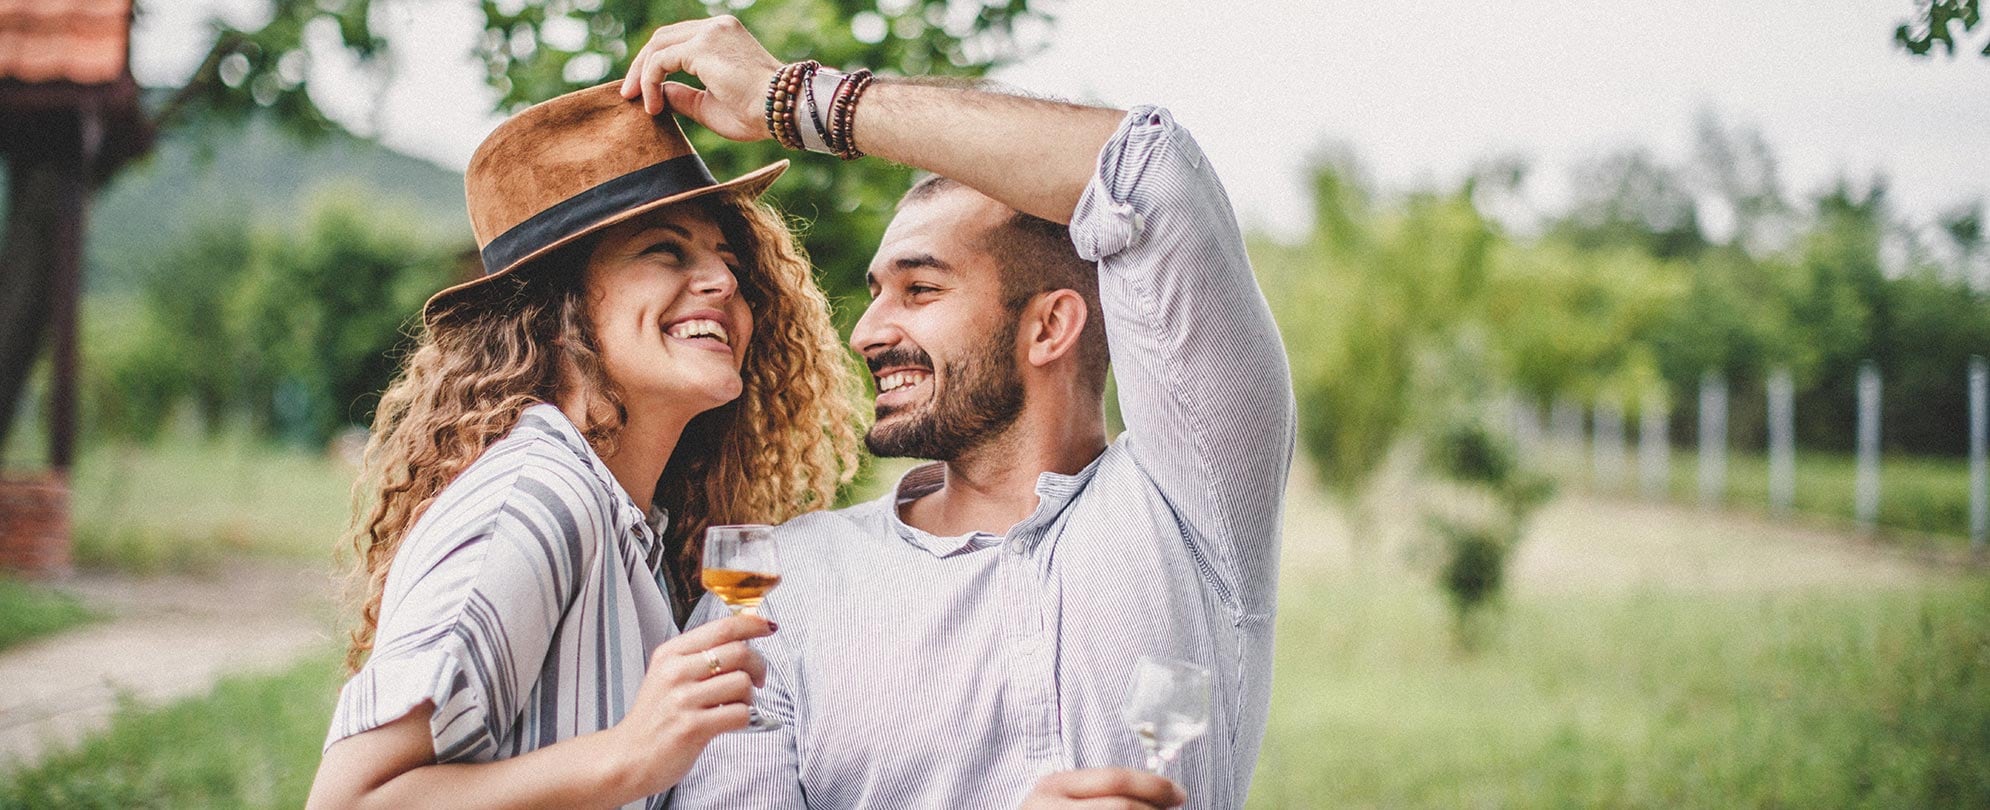 A smiling couple holding wine glasses outside and the man is playfully putting a hat on the woman’s head